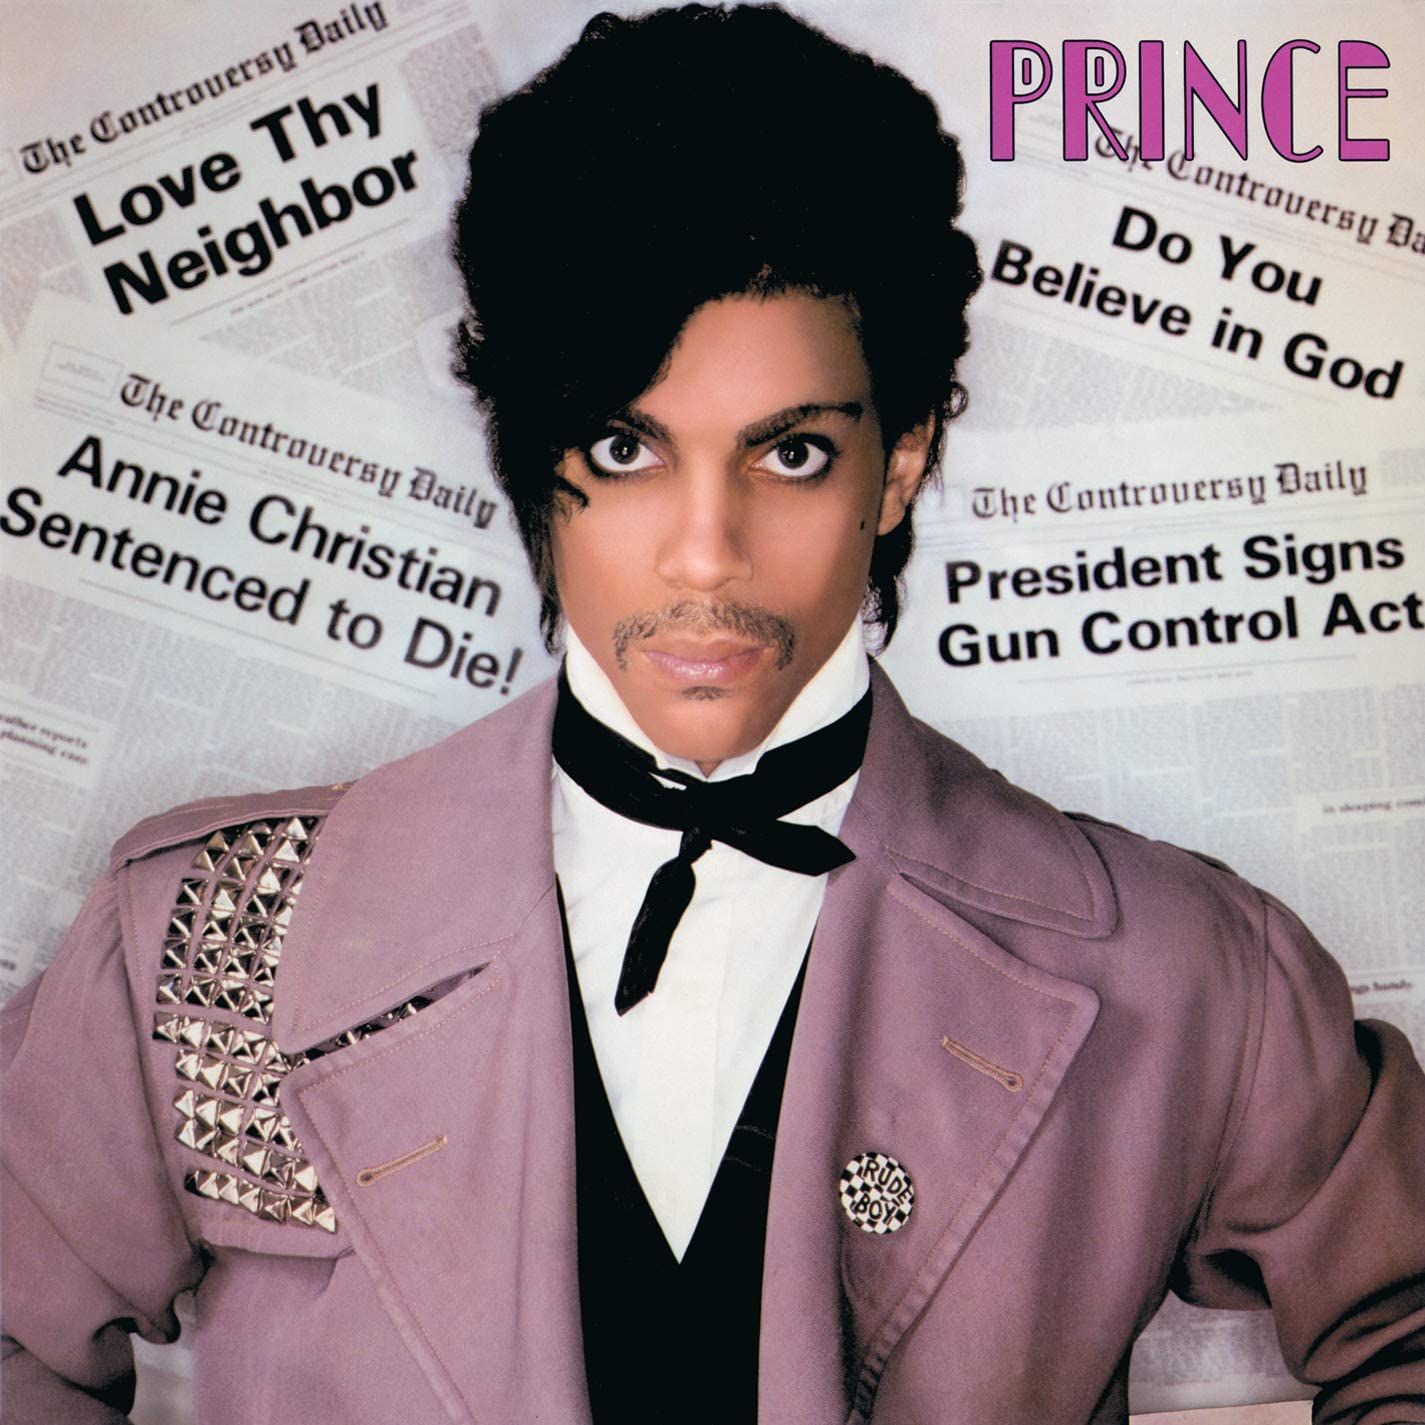 4th studio album on Vinyl from 1981 from Prince featuring his signature blending of religion and raw sexuality.